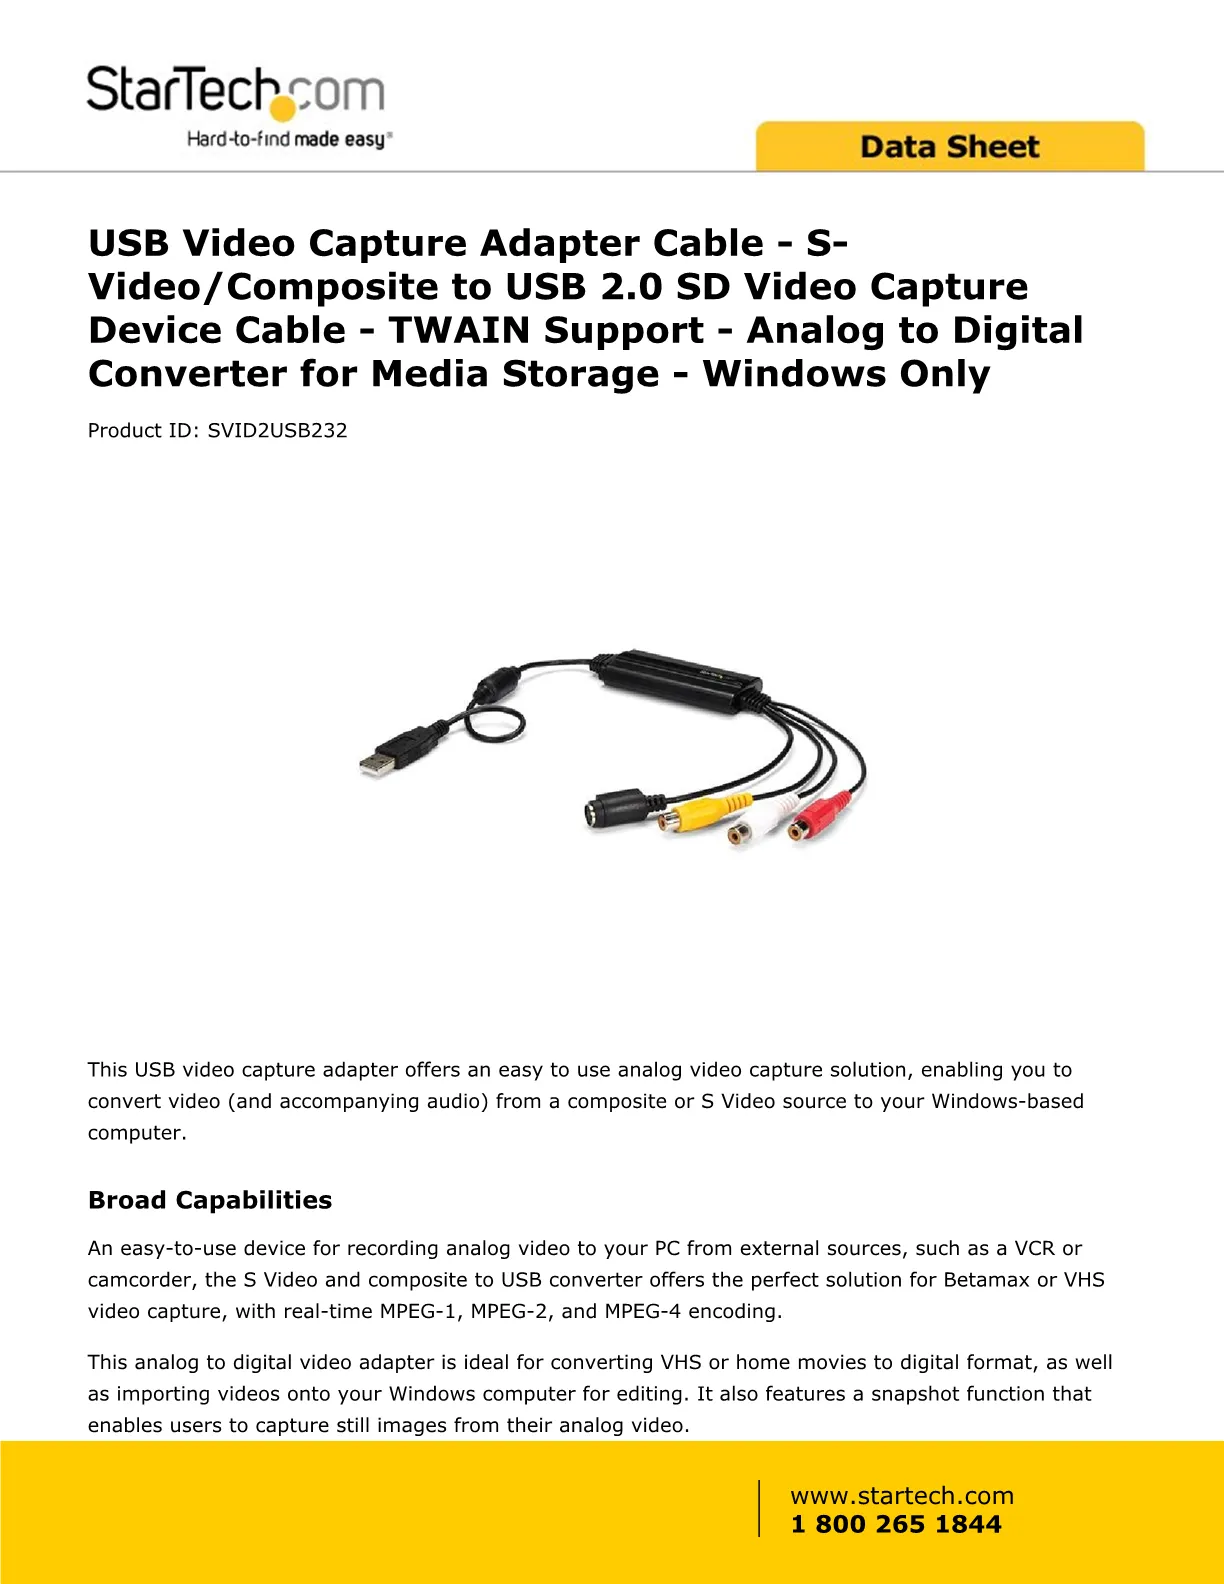 Product  StarTech.com USB Video Capture Adapter Cable, S-Video/Composite  to USB 2.0 SD Video Capture Device Cable, TWAIN Support, Analog to Digital  Converter for Media Storage, For Windows Only - SD Video